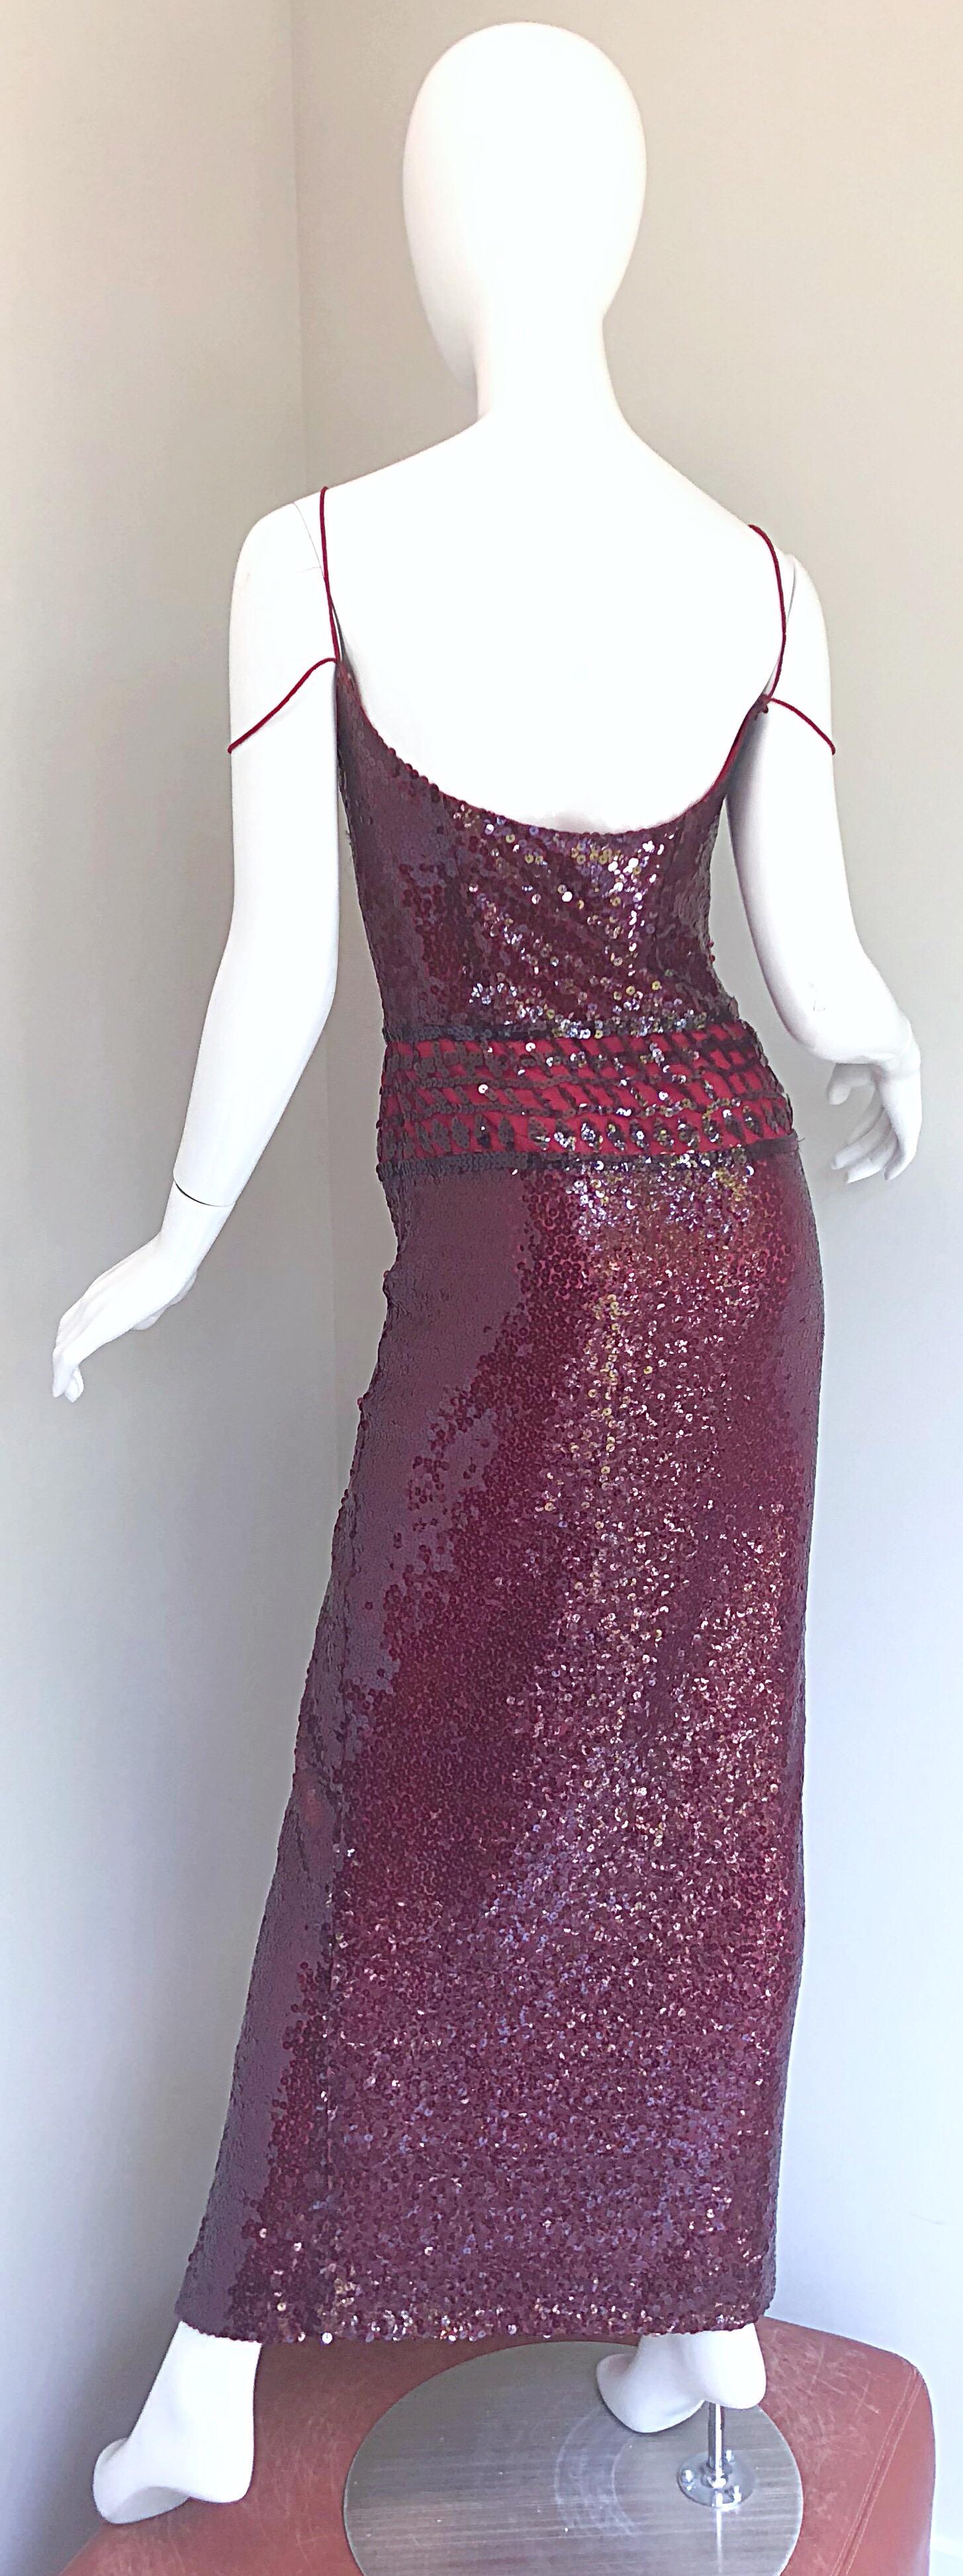 1990s Richard Tyler Couture Size 6 Cranberry Red Burgundy Sequin Vintage Gown  For Sale 8